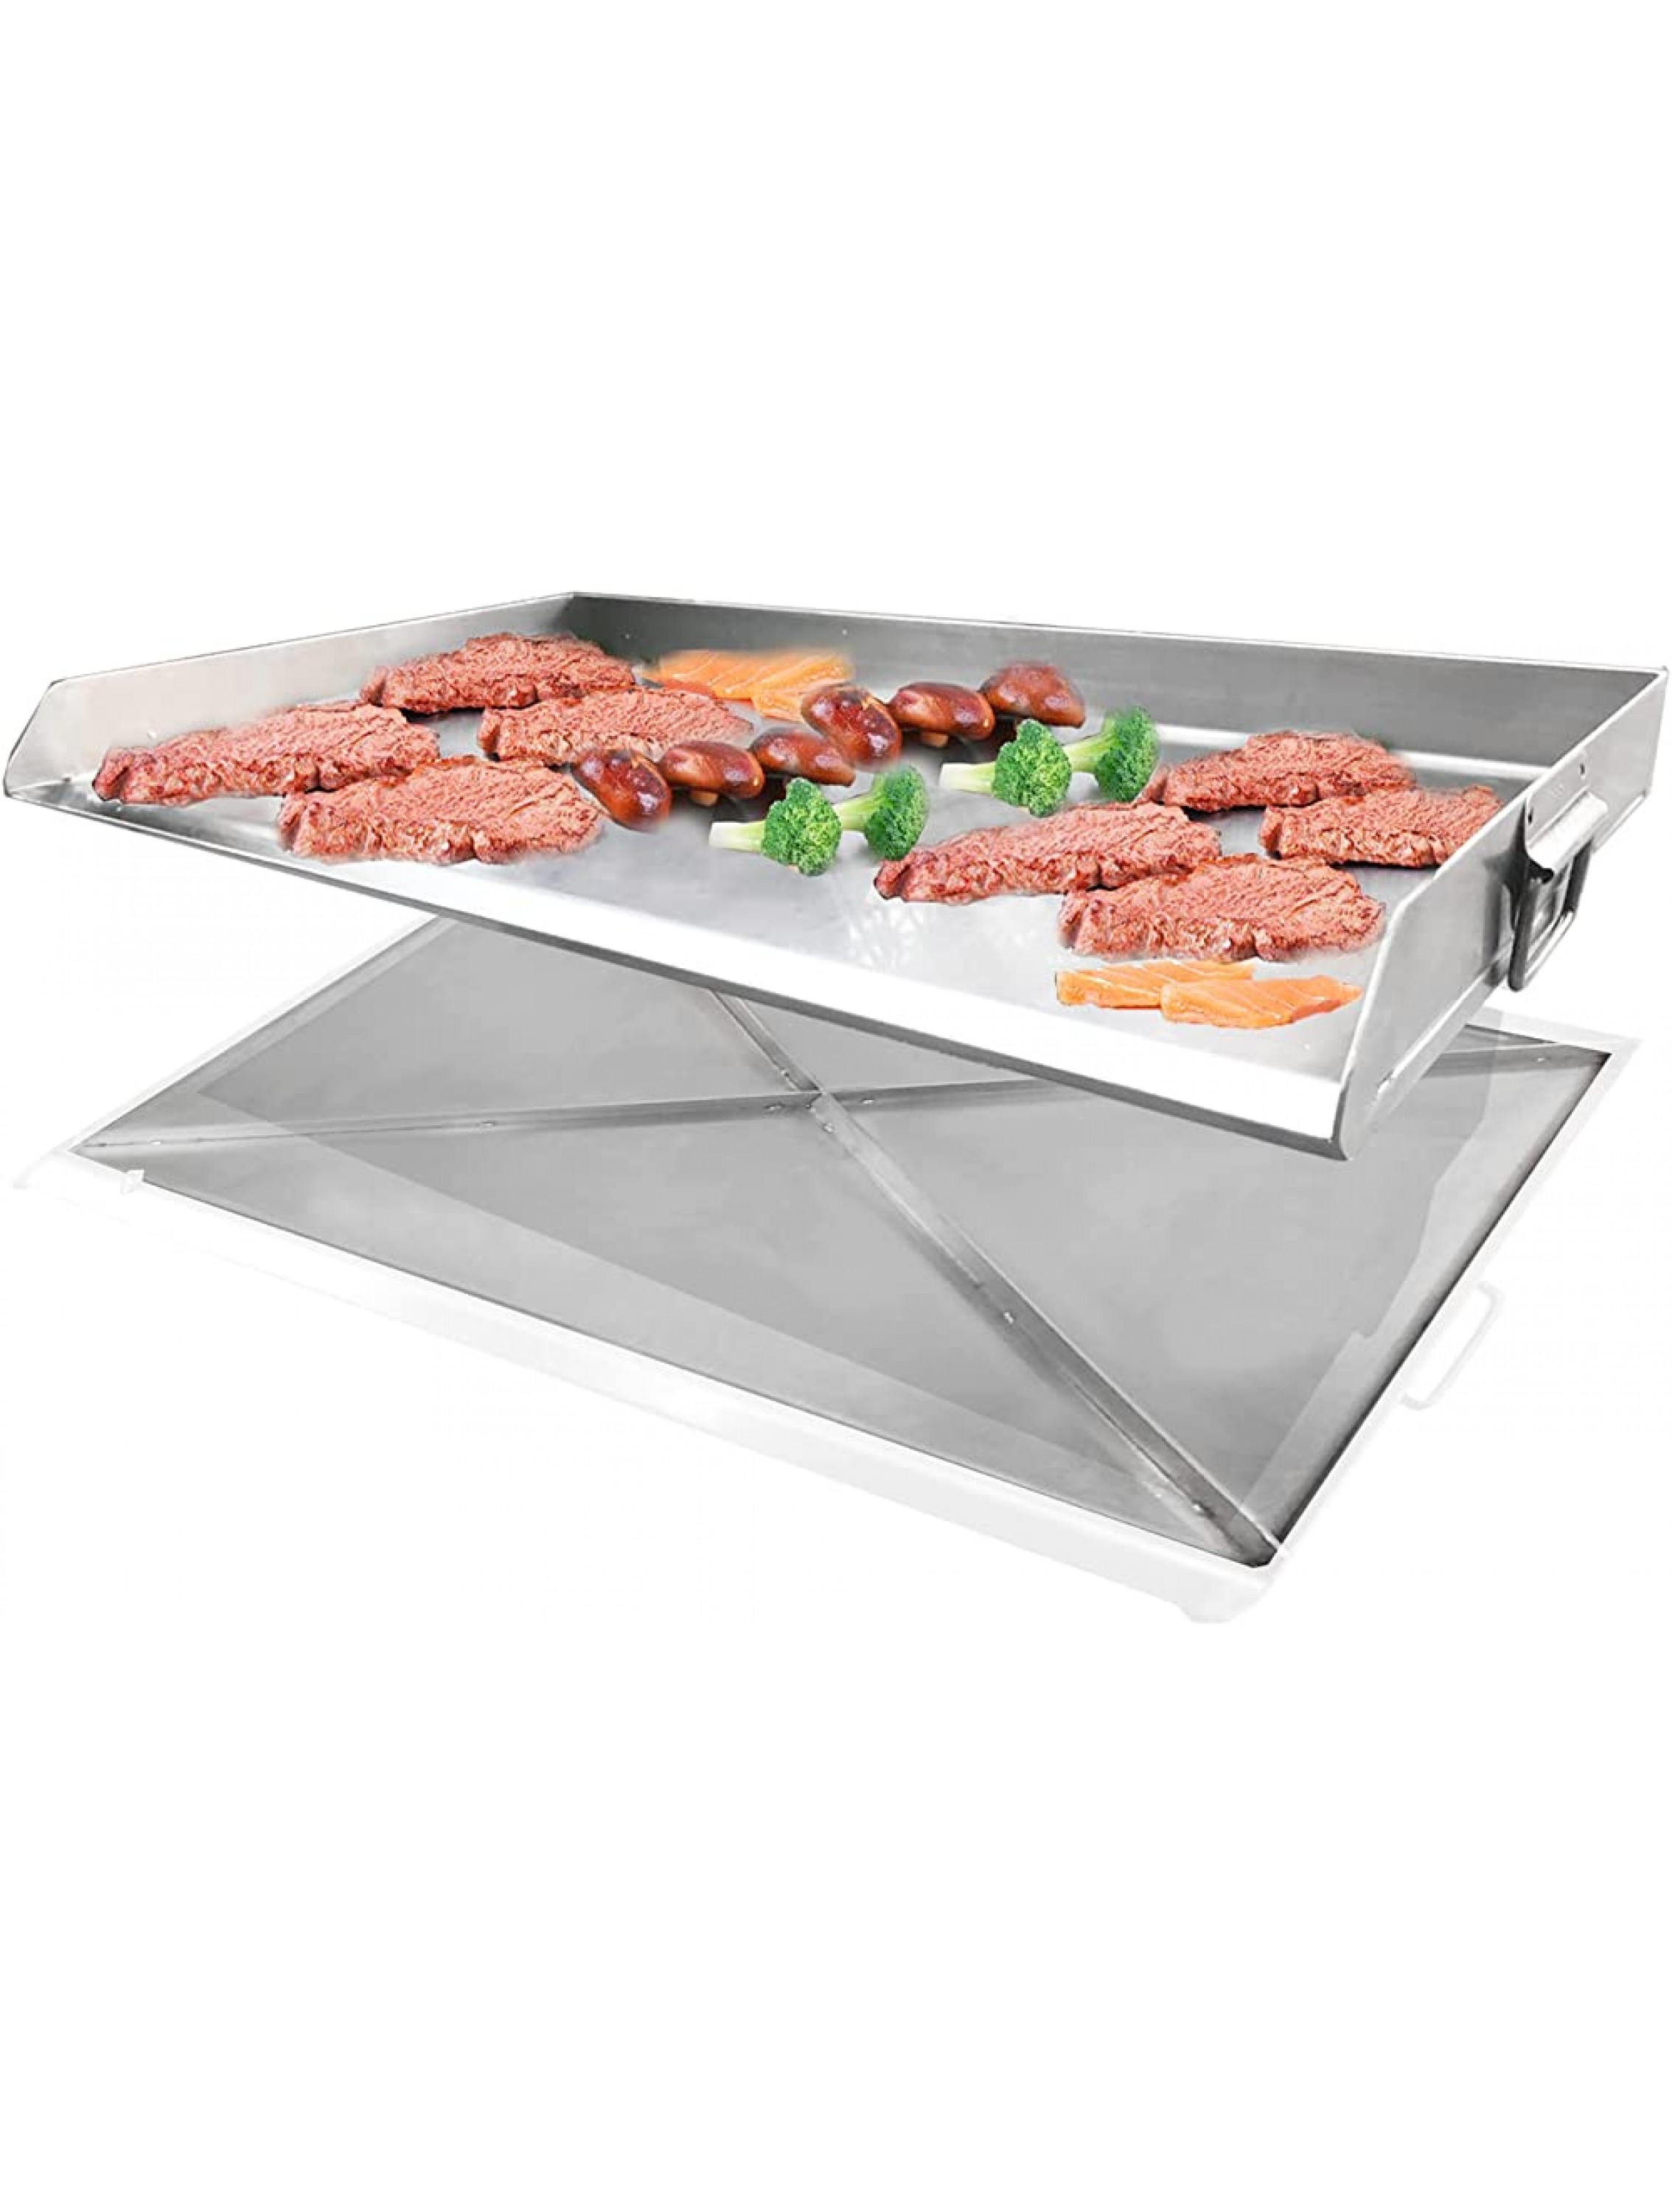 Minneer Stainless Steel Griddle Plate 32 x 18 Inch 100% Stainless Steel Grill with Heat Cross Bracing - B93FSWJHG